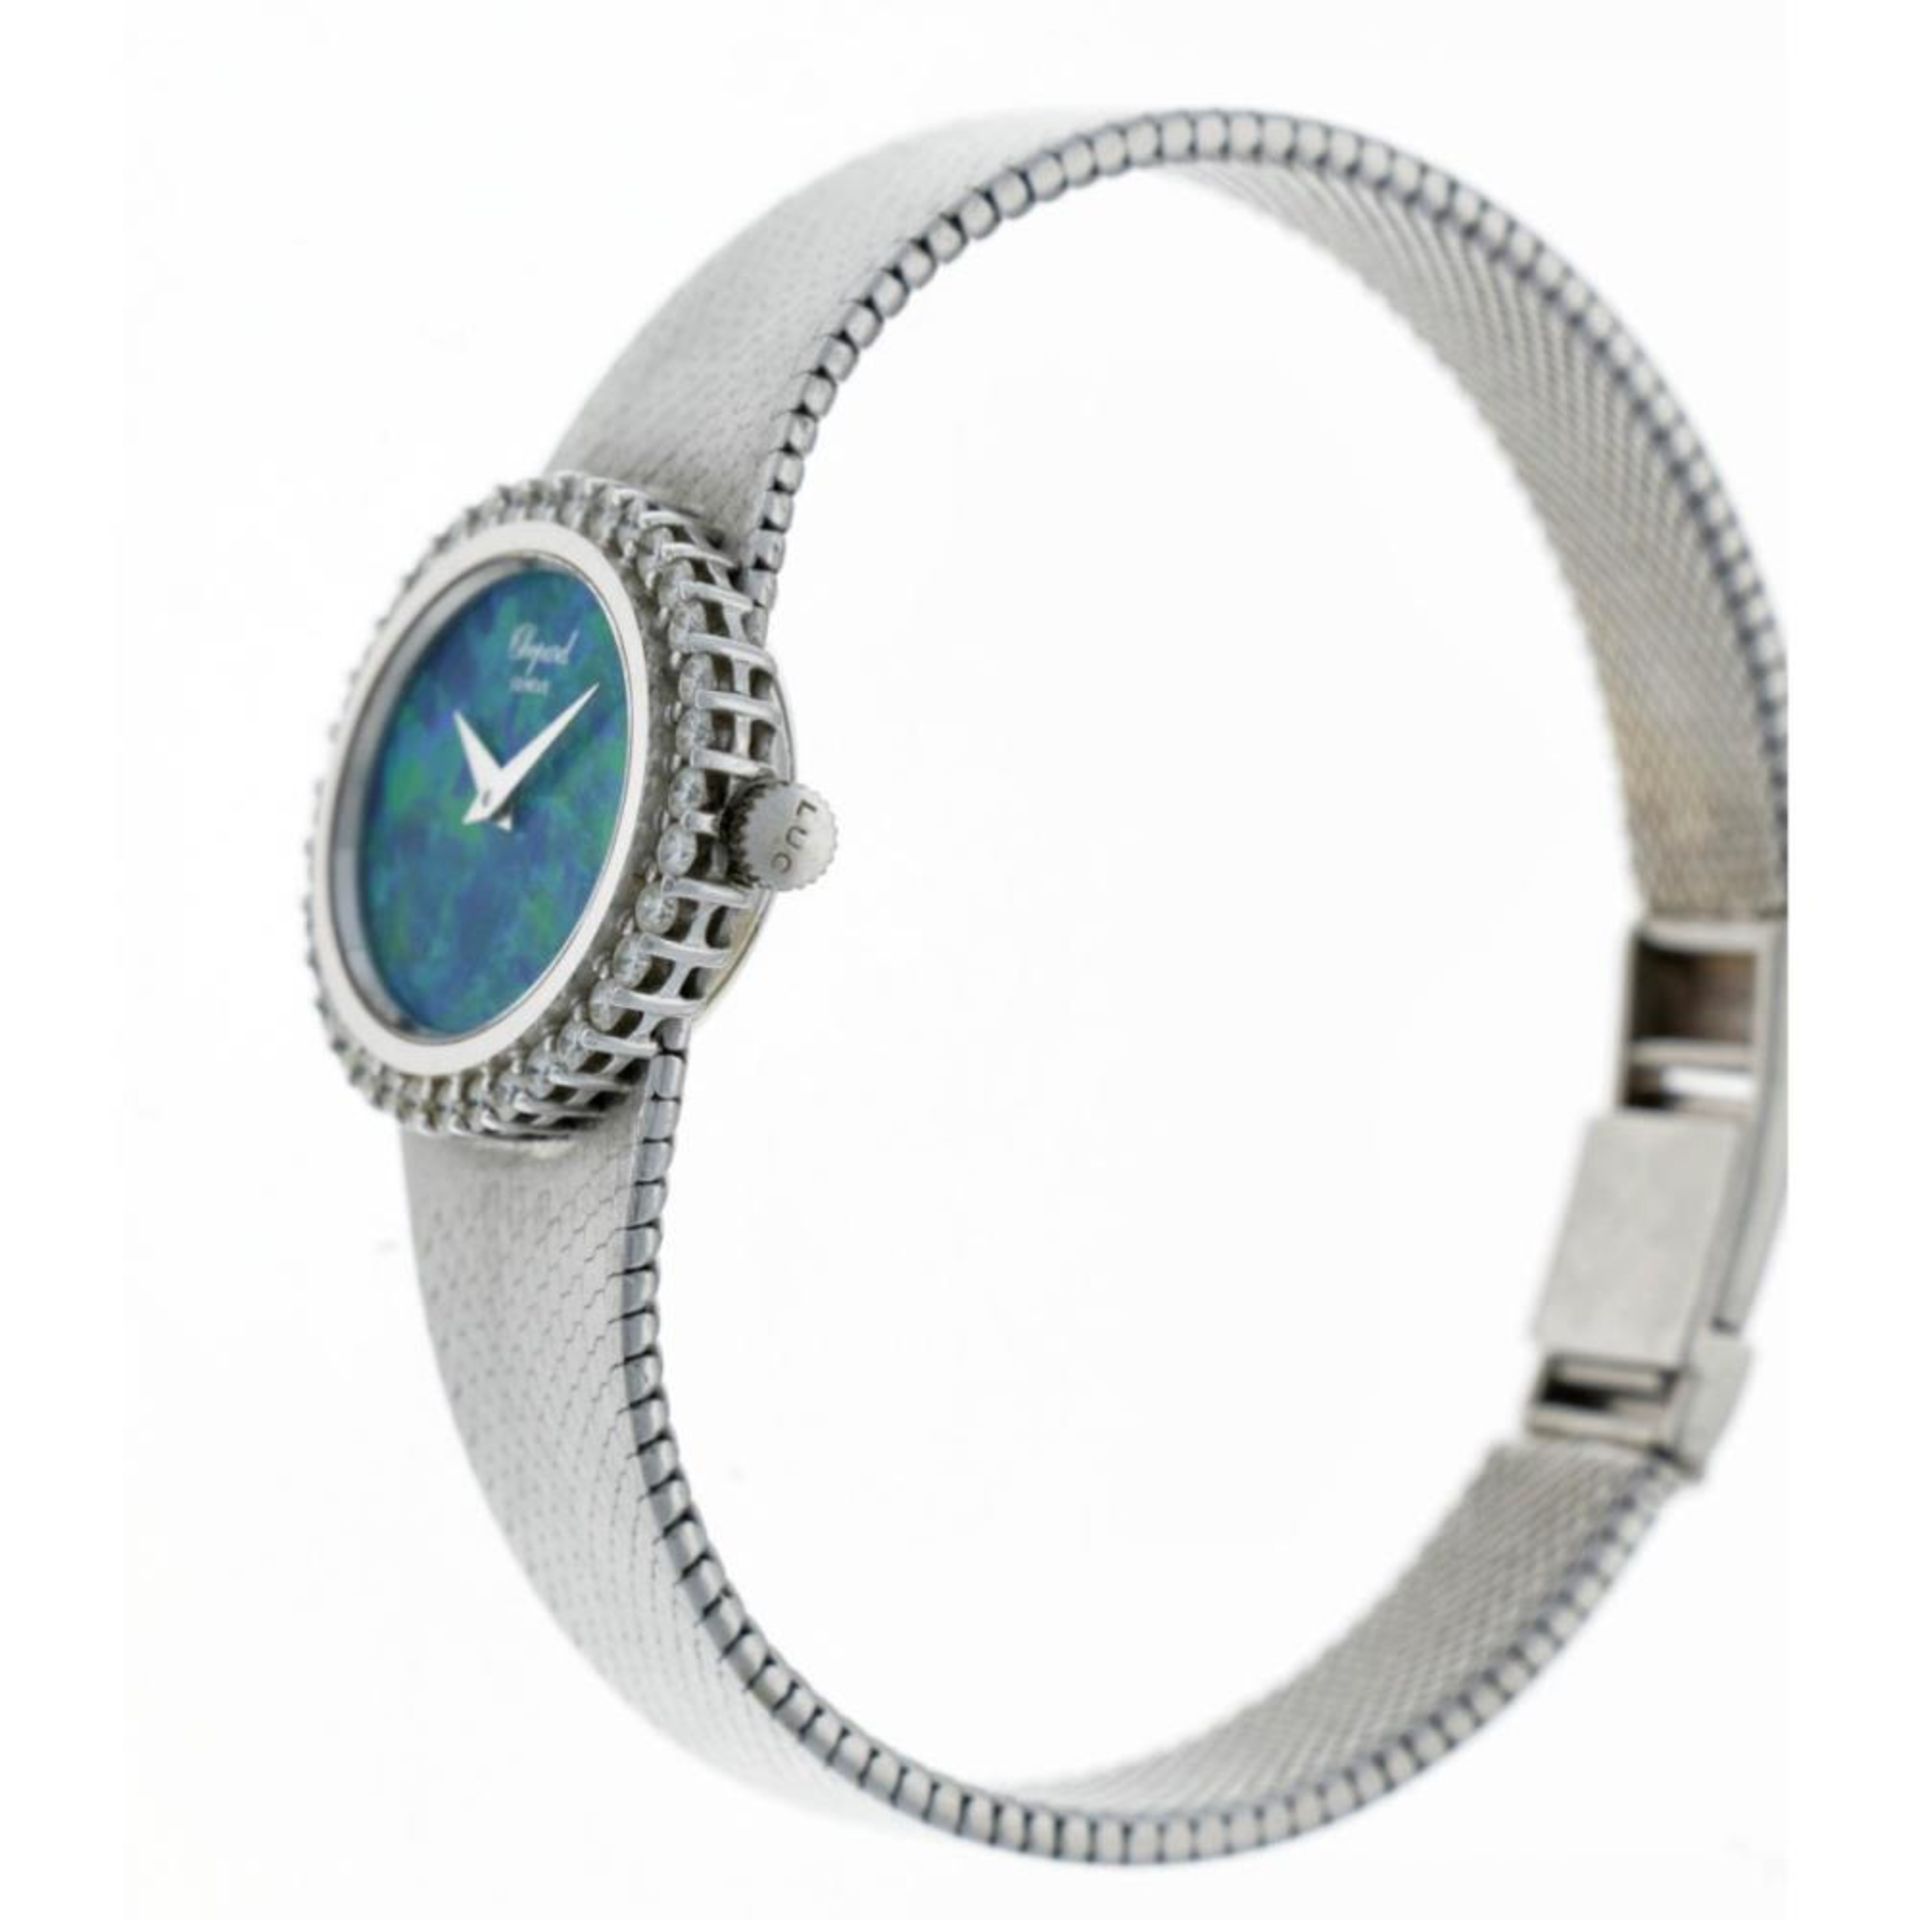 Chopard 5036 1 - Opal dial Diamonds - Ladies watch - approx. 1975. - Image 9 of 12